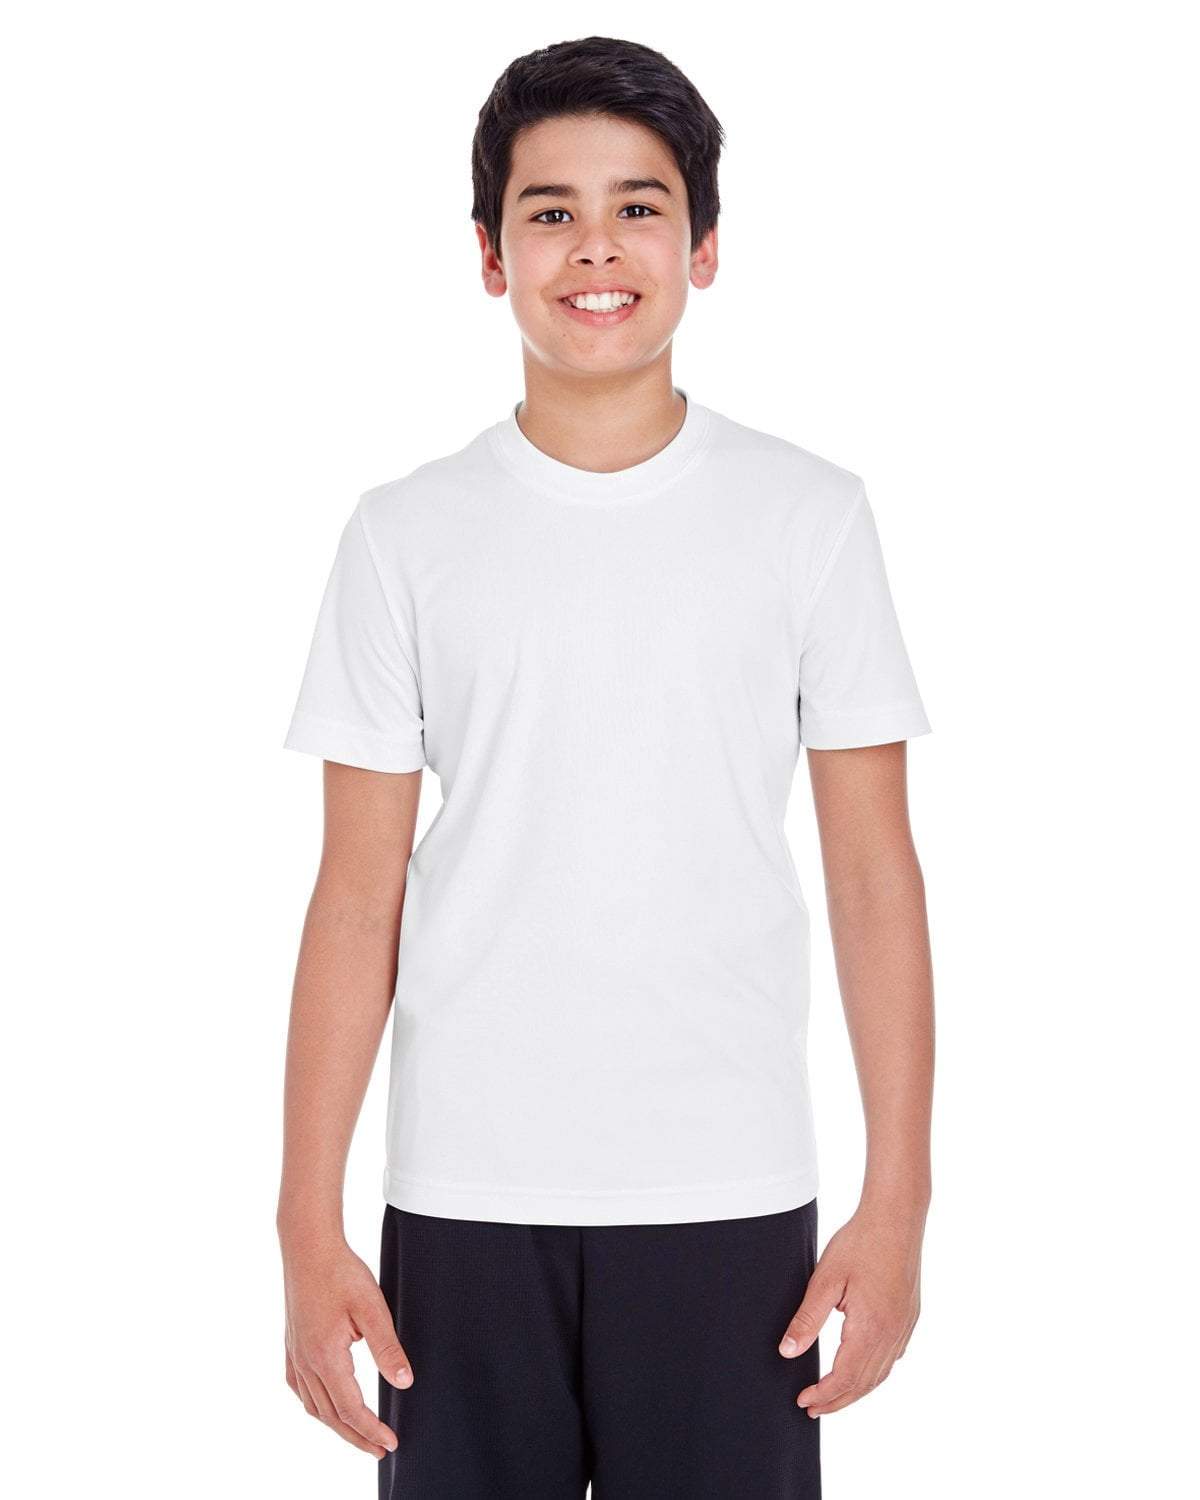 Apparel | Sublimation Youth T-shirt